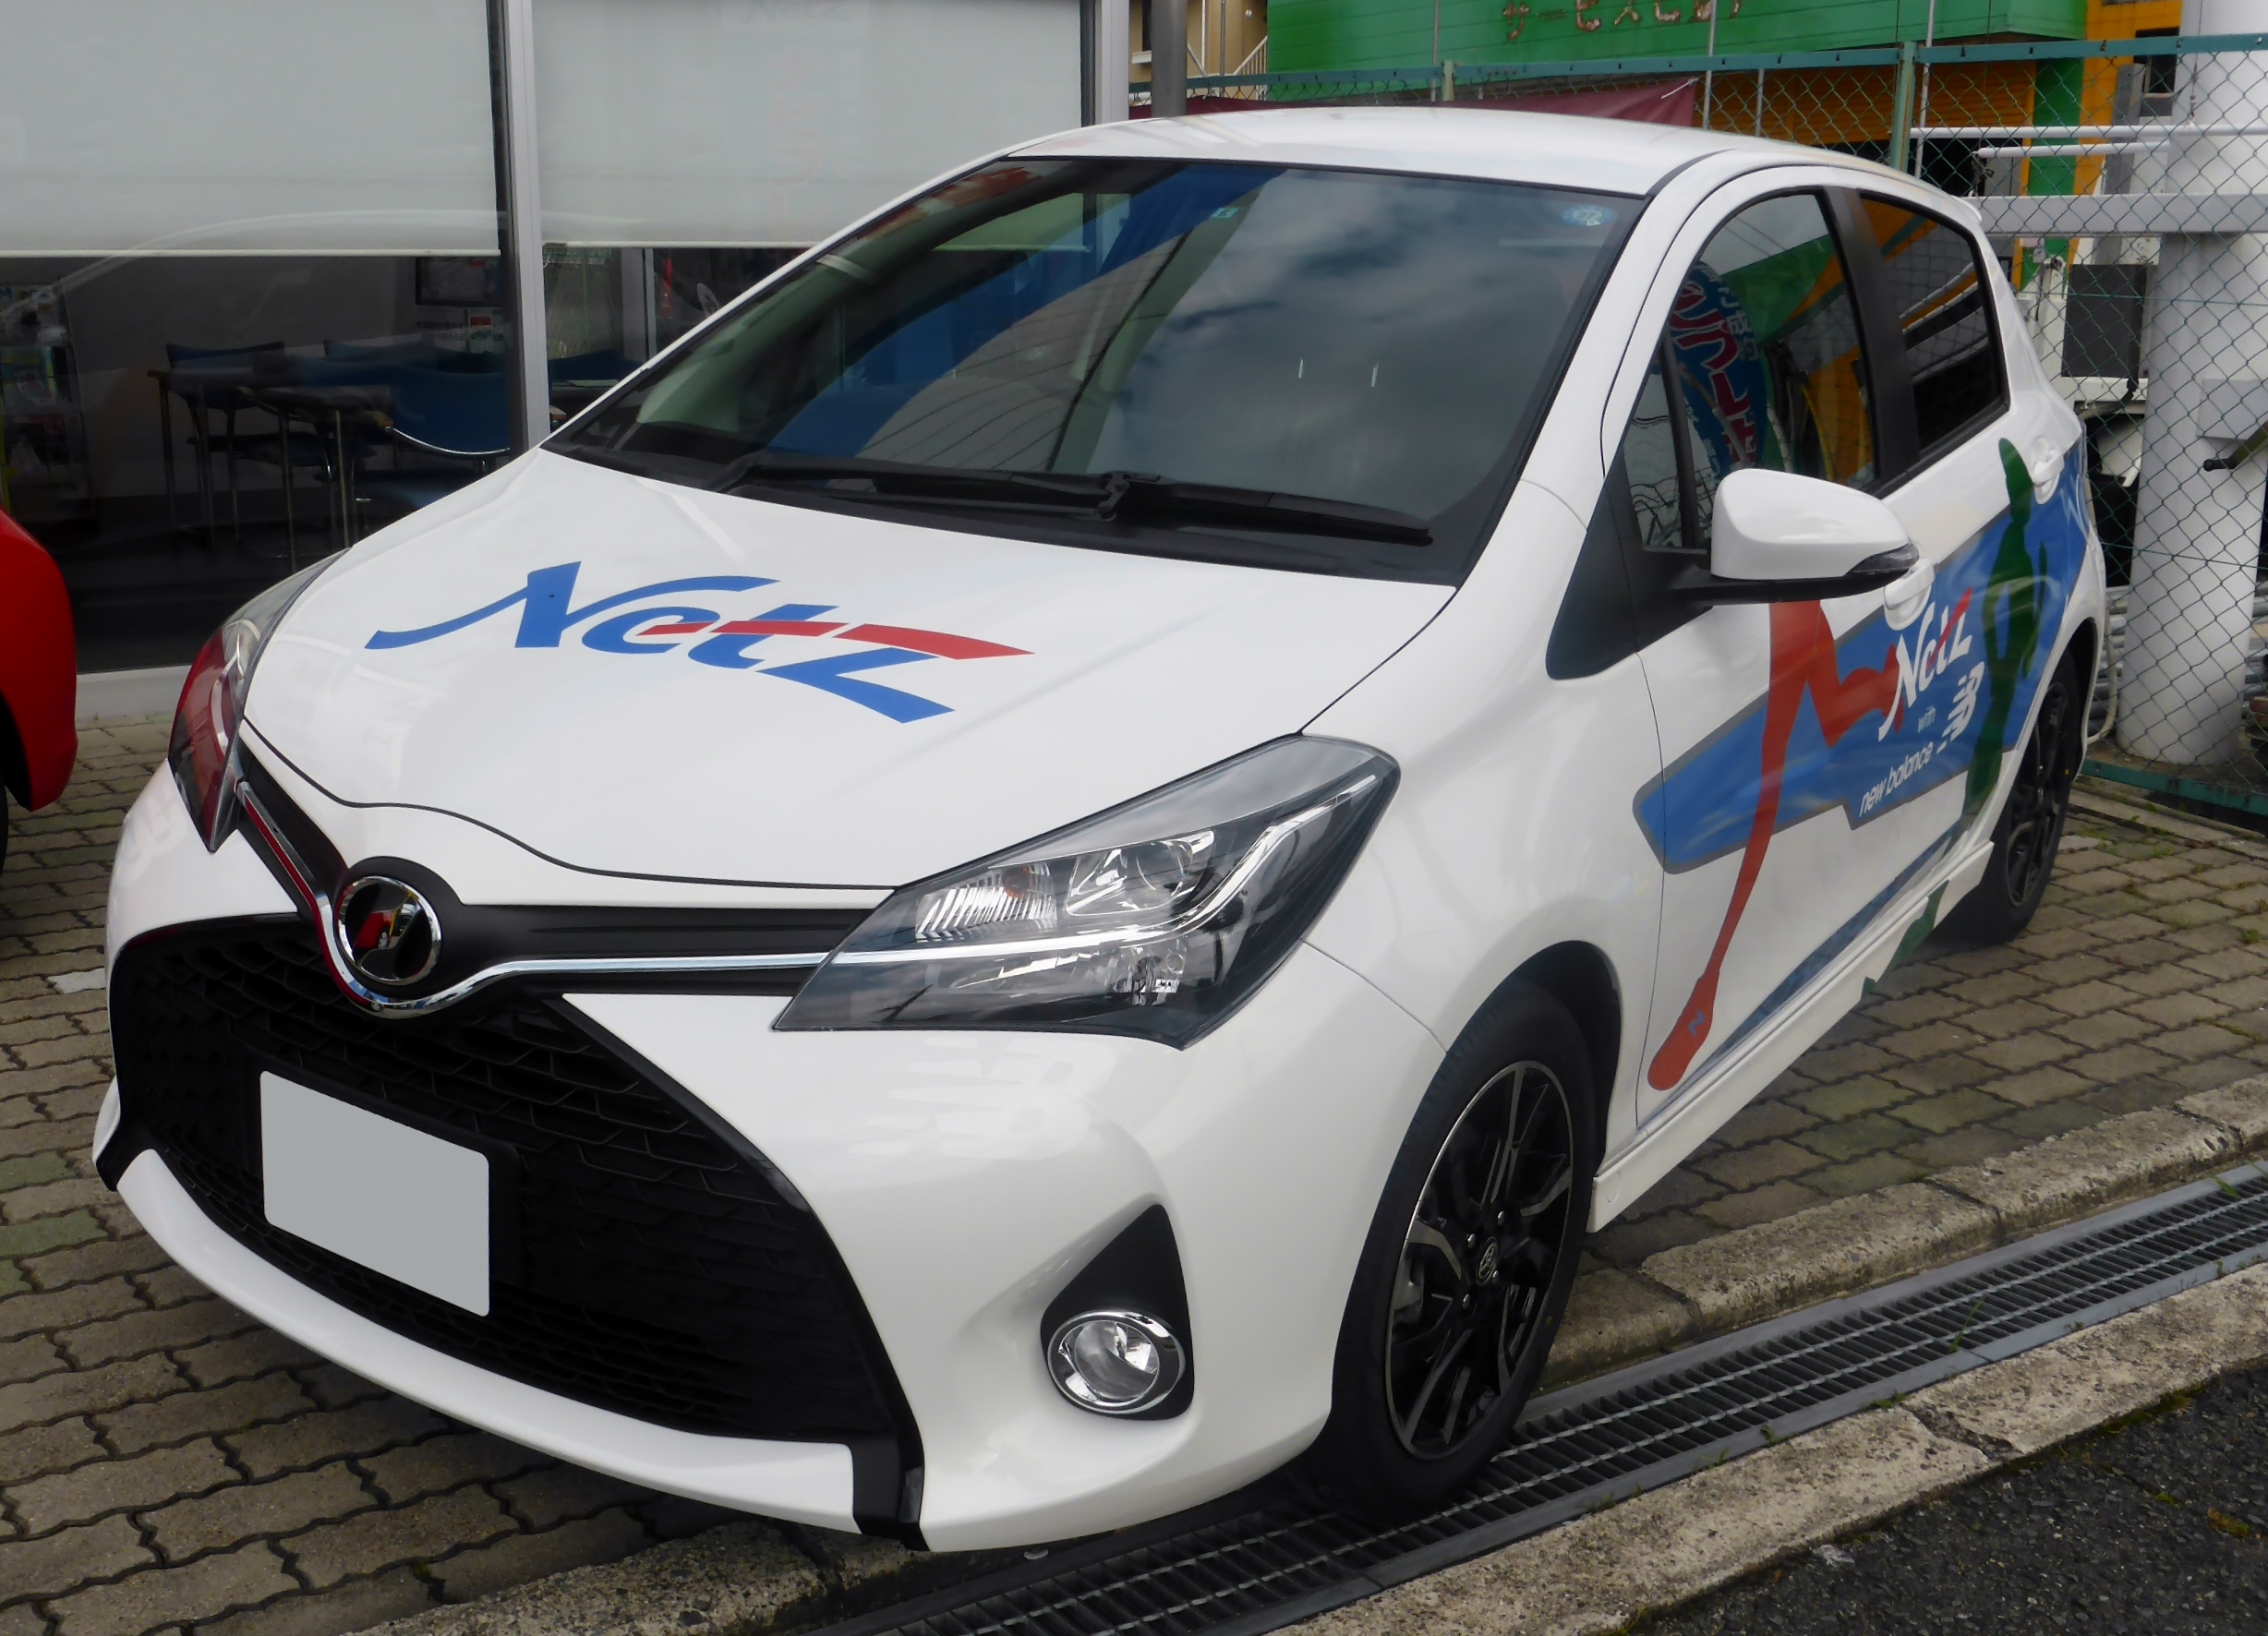 The frontview of Toyota Vitz 1.5RS (NCP131) Netz Toyota Nara with new balance